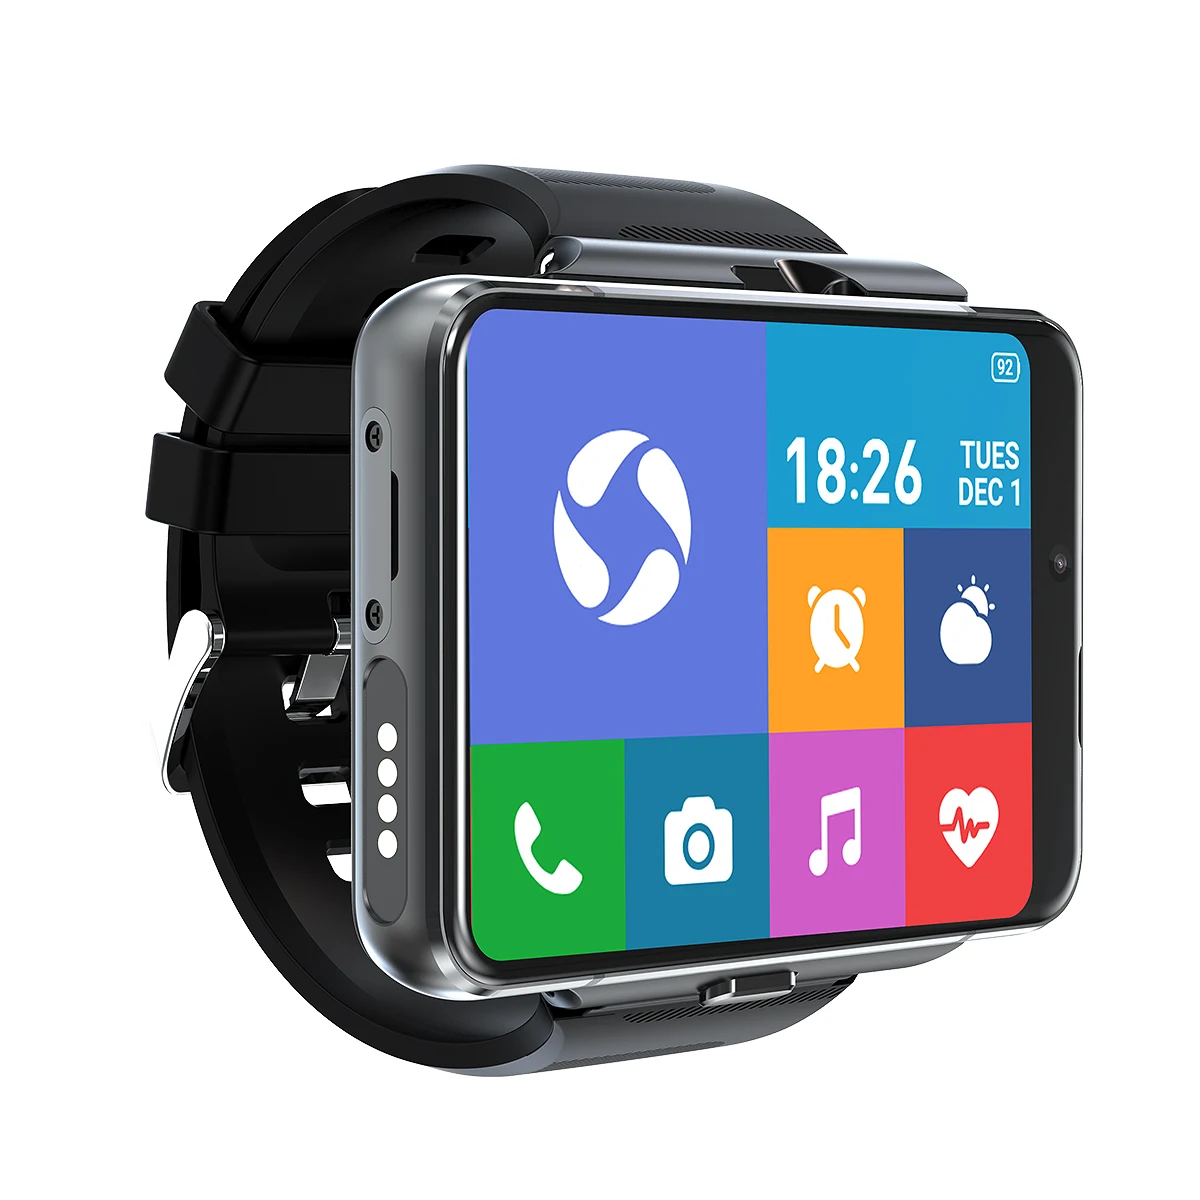 

4G Smart watch Factory Price S999 Wifi Gps Phone Take Video Smartwatch Phone 2.88" Large Screen Big Battery Android 9 LET Watch